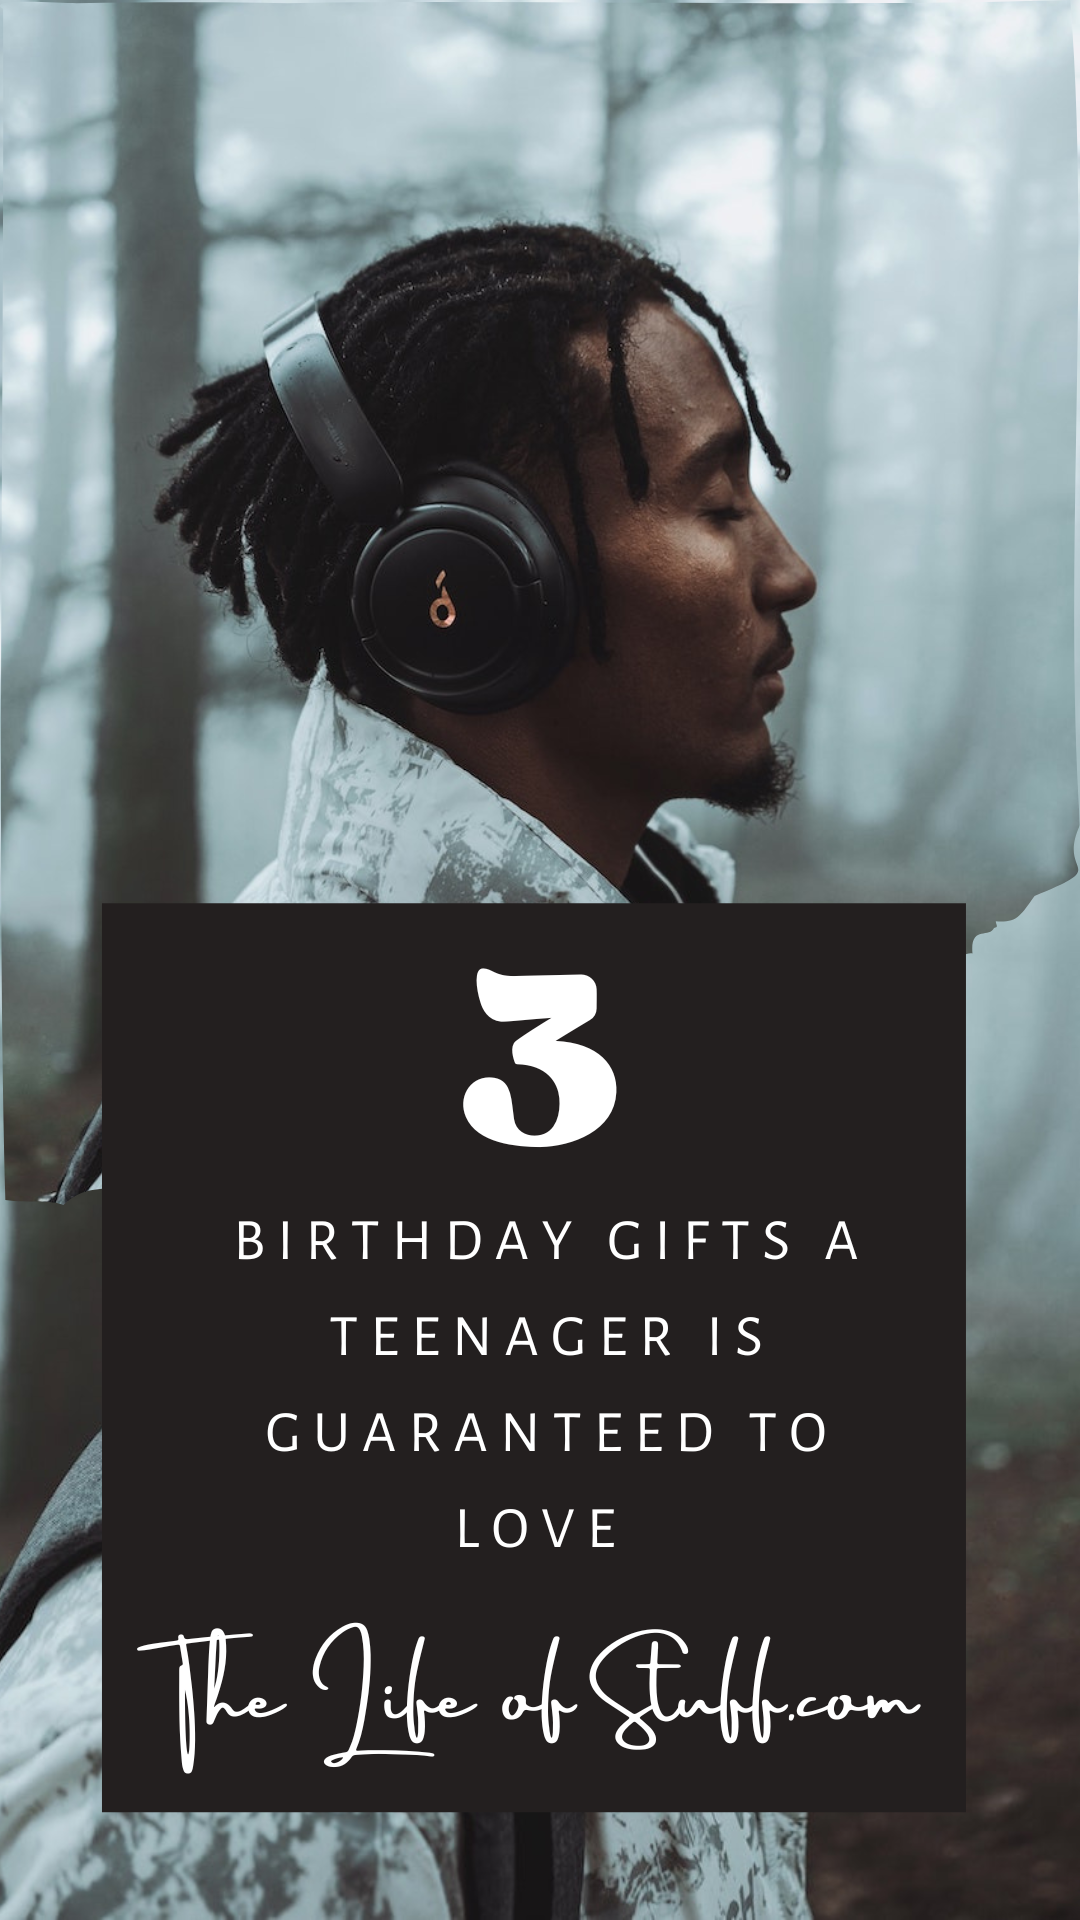 3 Birthday Gifts A Teenager Is Guaranteed To Love - The Life of Stuff